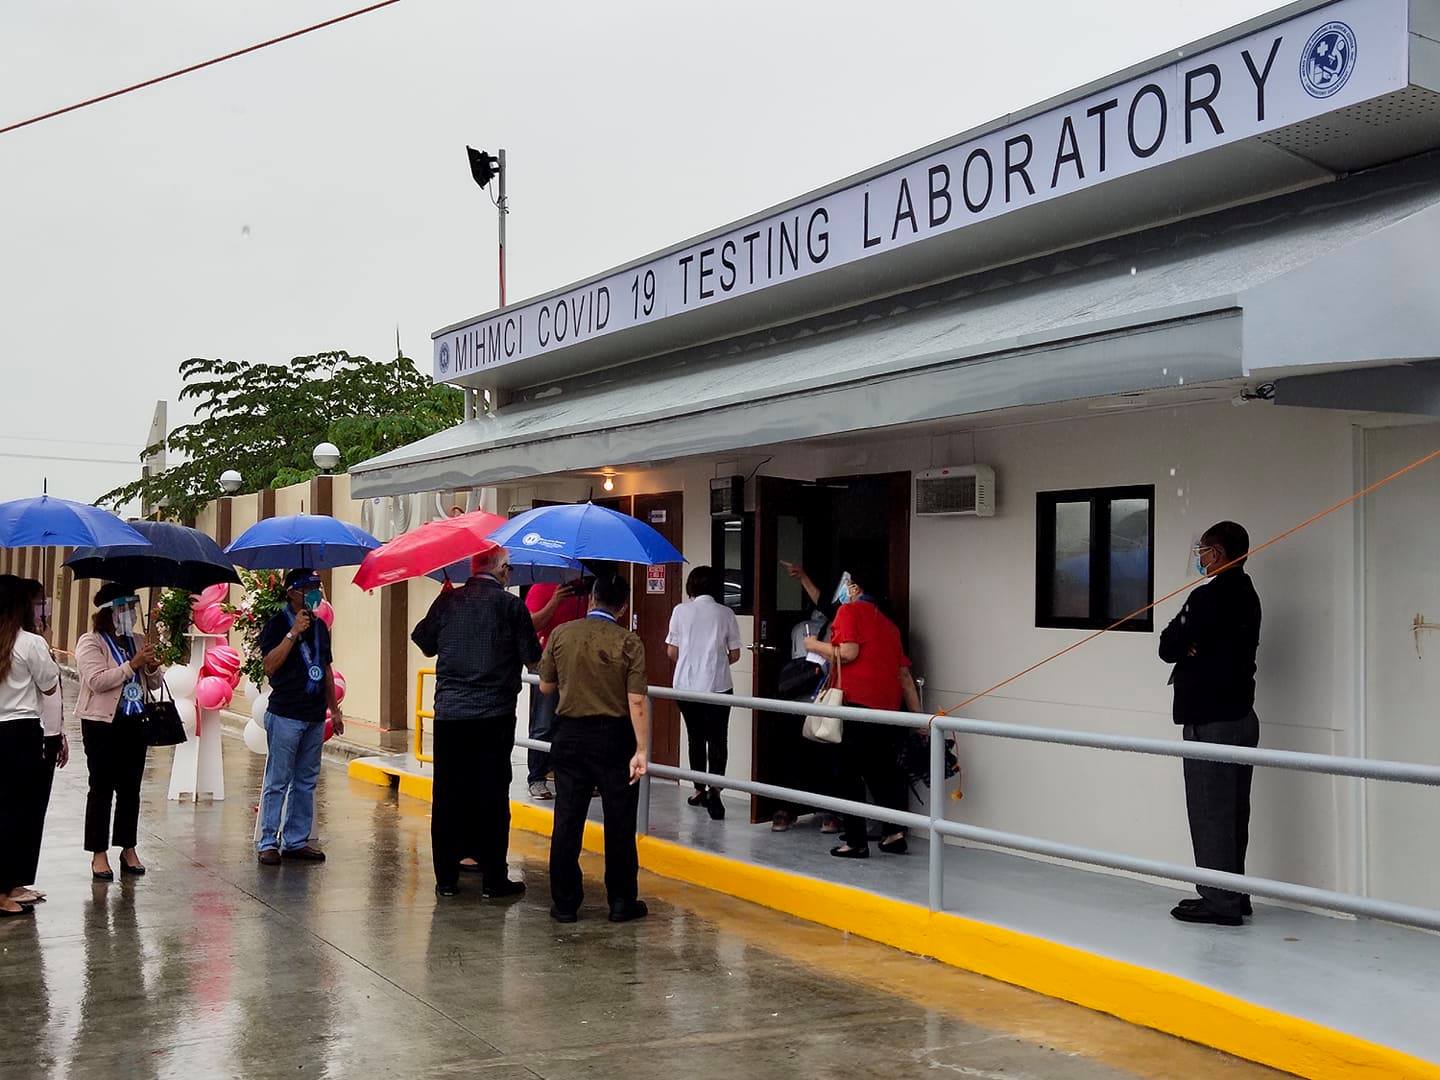 Metro Iloilo COVID-19 Testing center opens with support from PGC - Visayas and Iloilo’s top schools